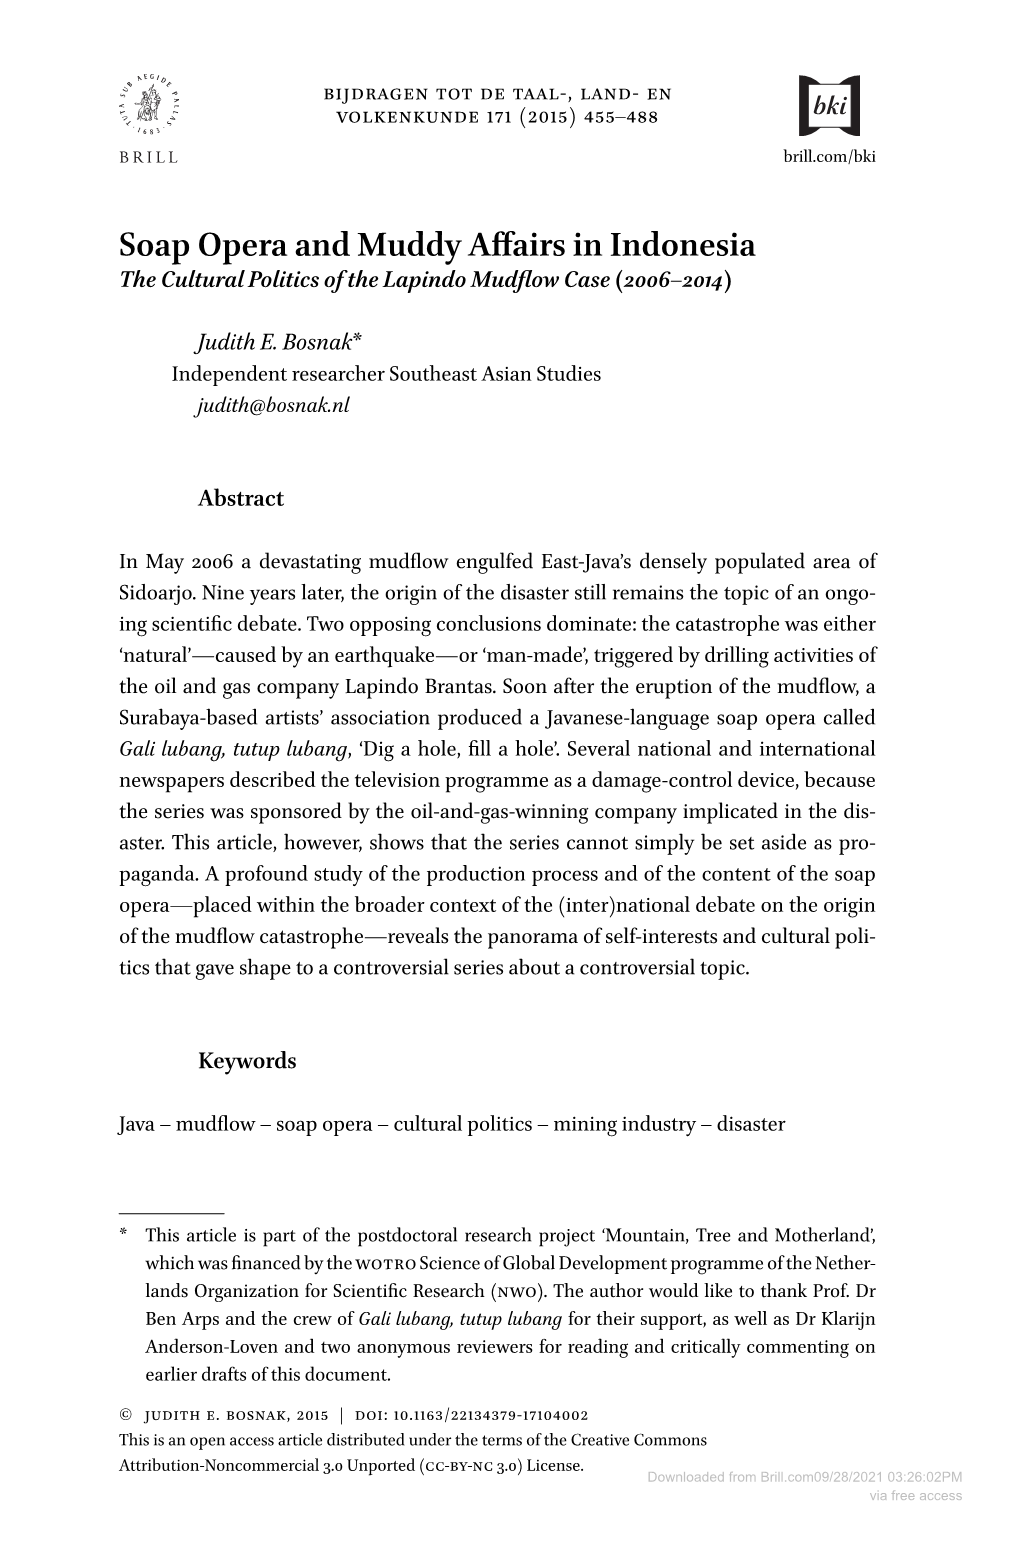 Soap Opera and Muddy Affairs in Indonesia the Cultural Politics of the Lapindo Mudflow Case (2006–2014)